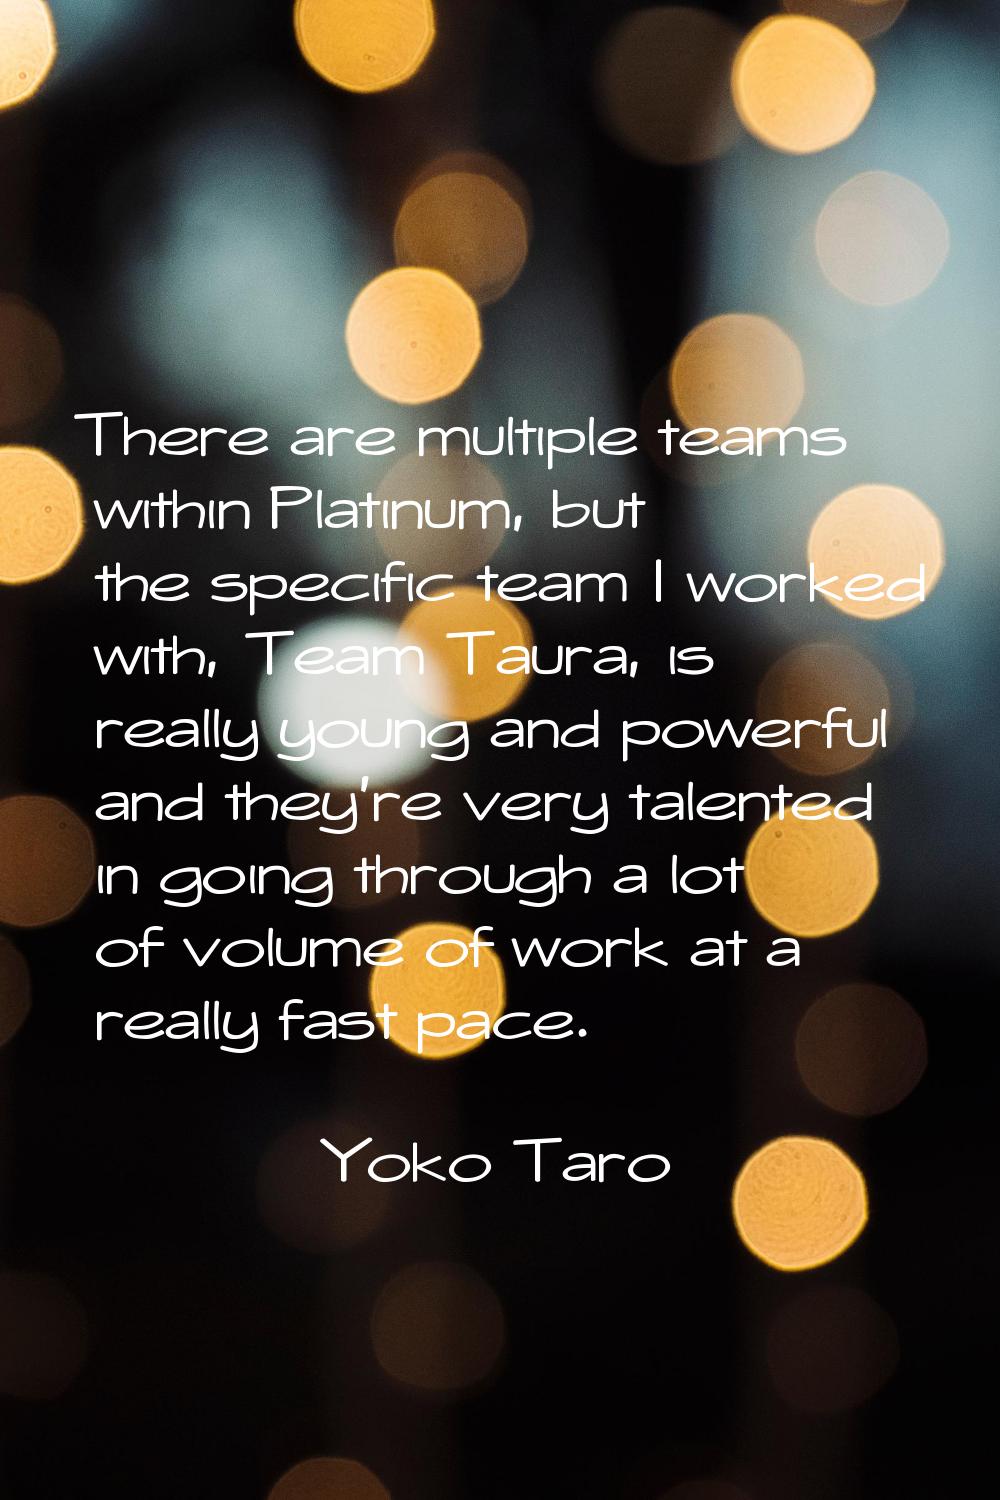 There are multiple teams within Platinum, but the specific team I worked with, Team Taura, is reall